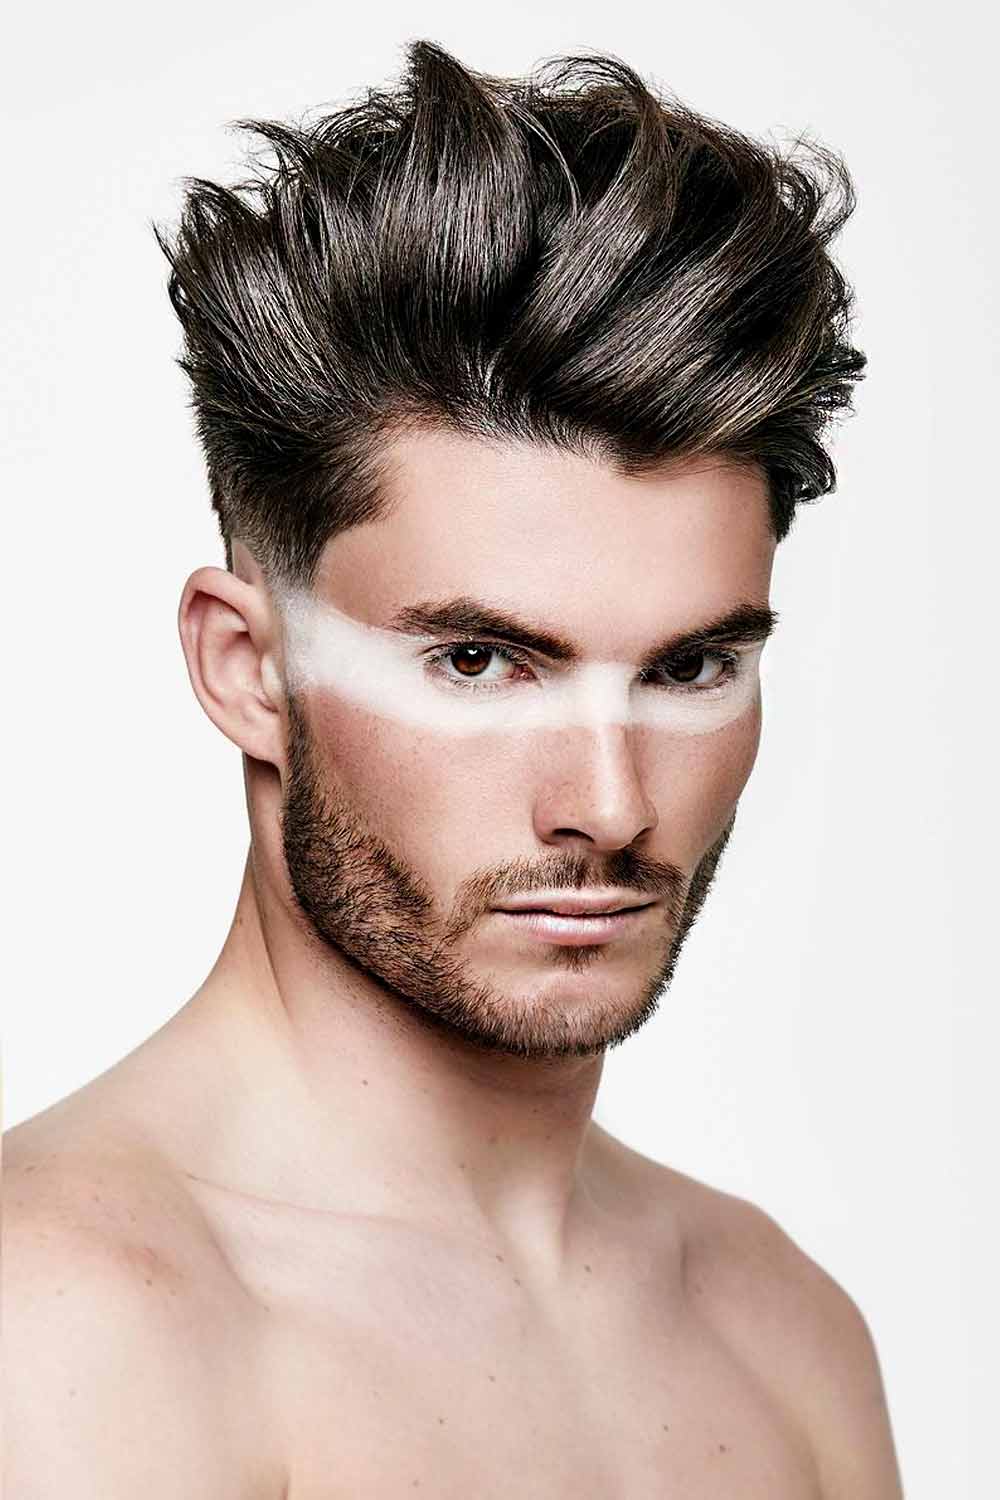 Long Top Short Sides Hairstyles #typesofhaircutsmen #typesofhaircuts #haircutsmen #hairstylesmen